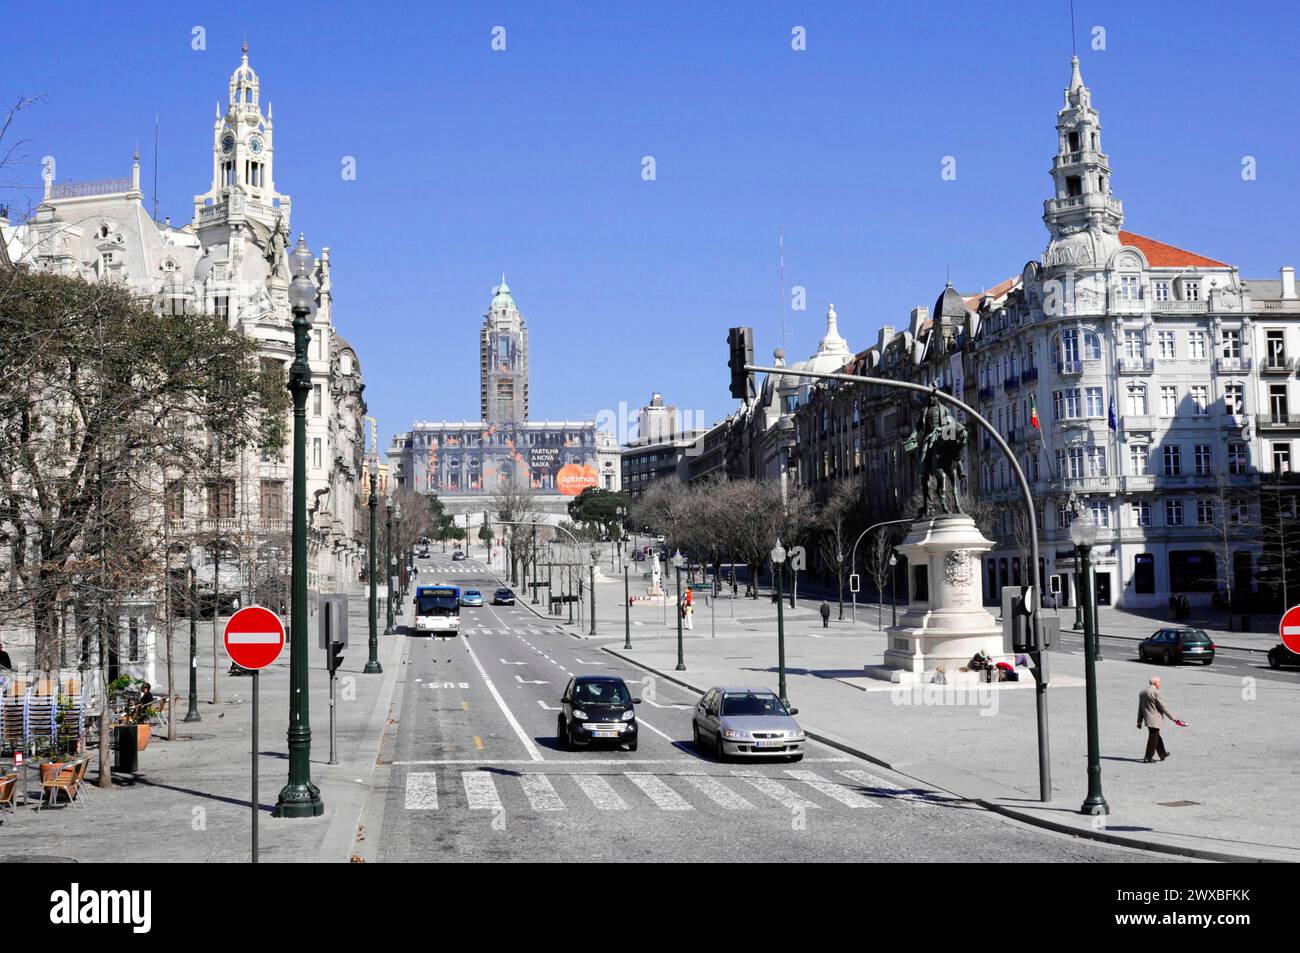 City view under a clear sky with historic buildings and streets, Northern Portugal, Portugal Stock Photo